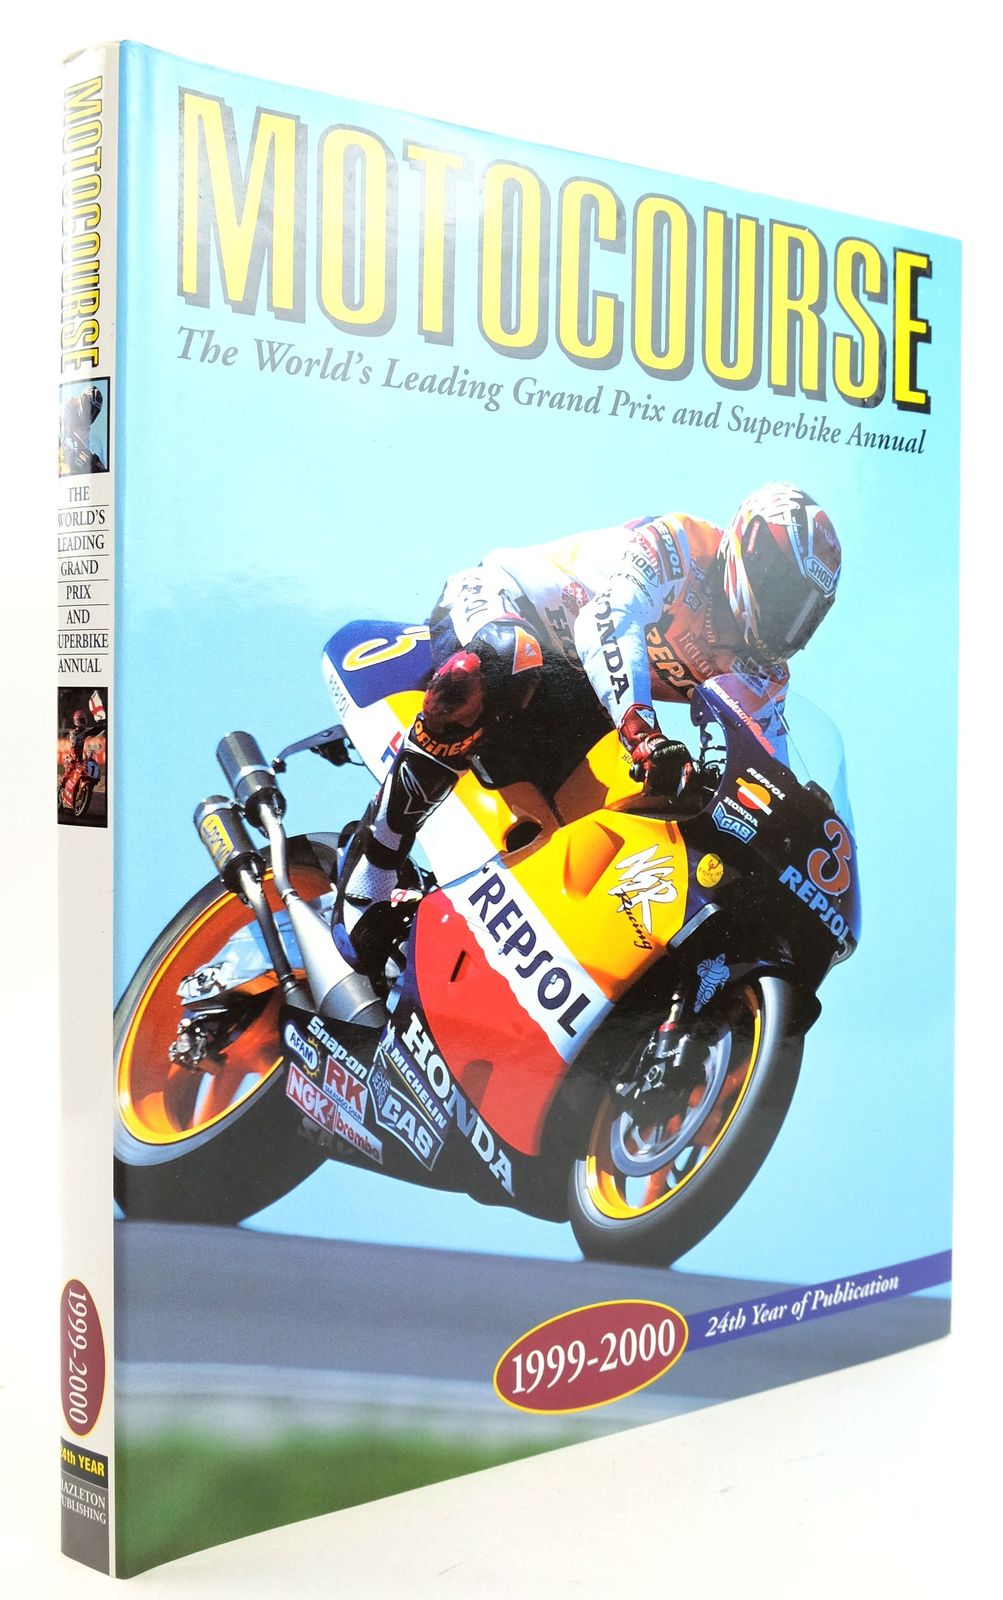 Photo of MOTOCOURSE 1999-2000 published by Hazleton Publishing (STOCK CODE: 1819884)  for sale by Stella & Rose's Books